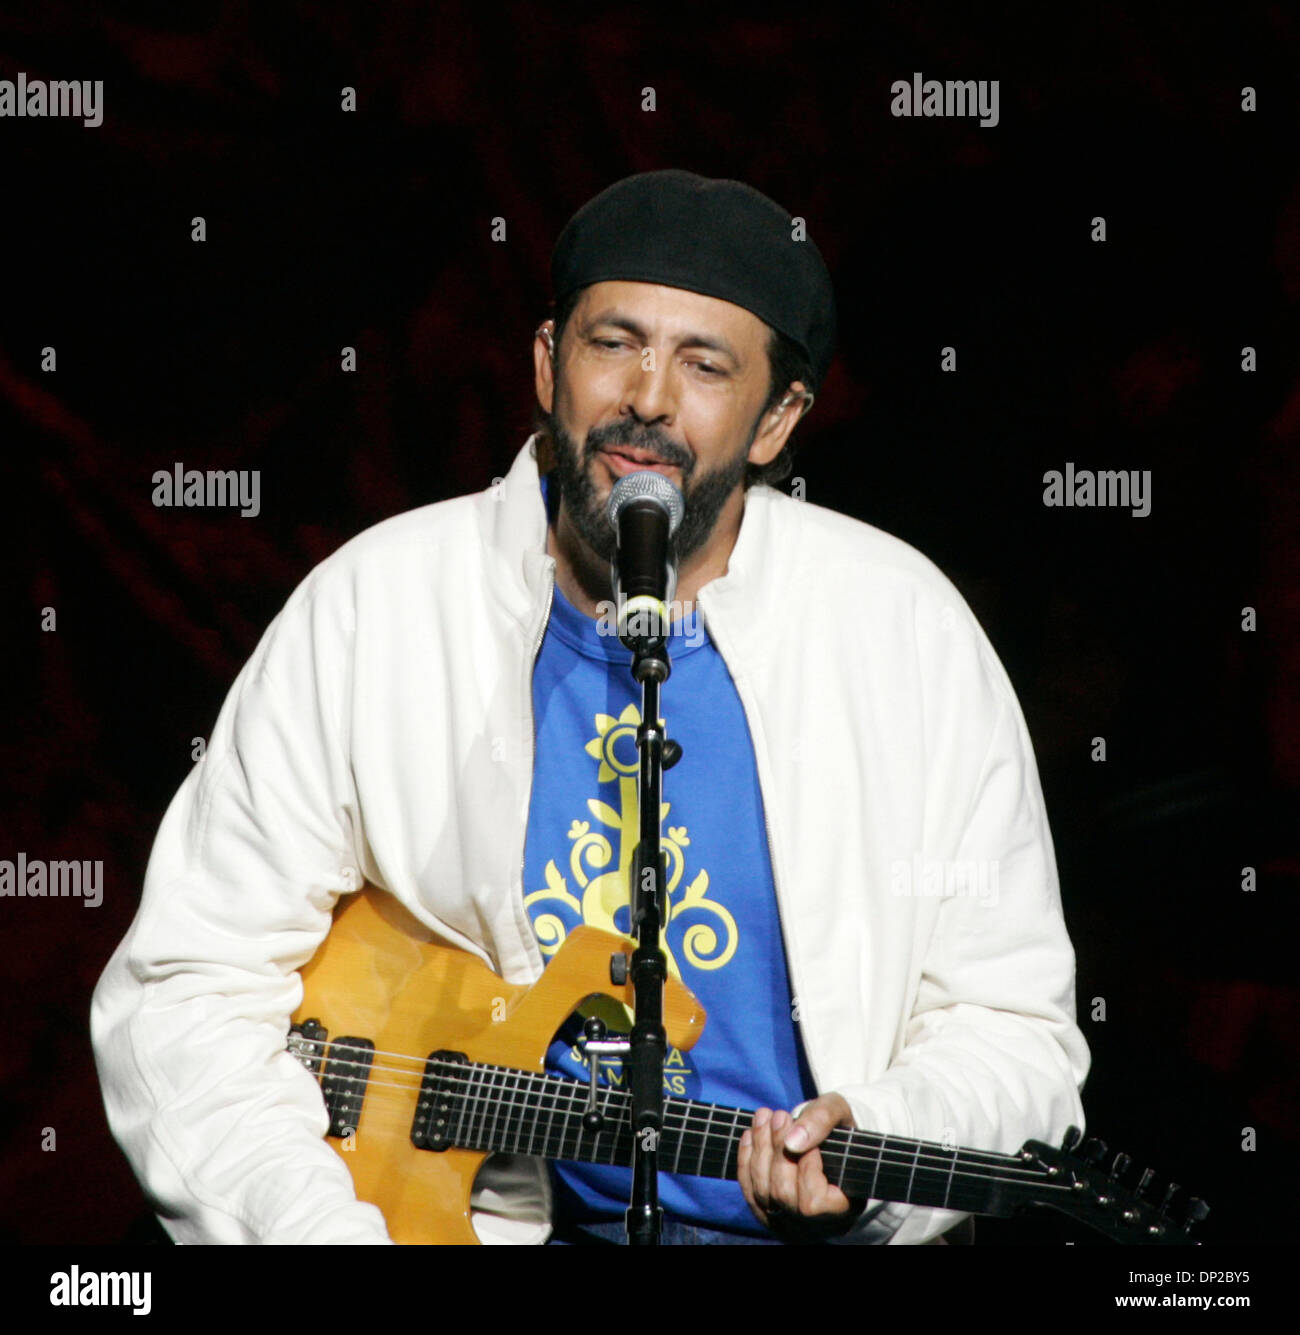 May 26, 2006; Los Angeles, CA, USA; JUAN LUIS GUERRA performs during 'Colombia sin Minas,' a benefit concert at the Gibson Amphitheater in Los Angeles Wednesday, May 24, 2006. The concert presented by Colombian singer Juanes and United For Colombia, raises money for children victimized by antipersonnel mines in Colombia. Mandatory Credit: Photo by Armando Arorizo/ZUMA Press. (©) Co Stock Photo